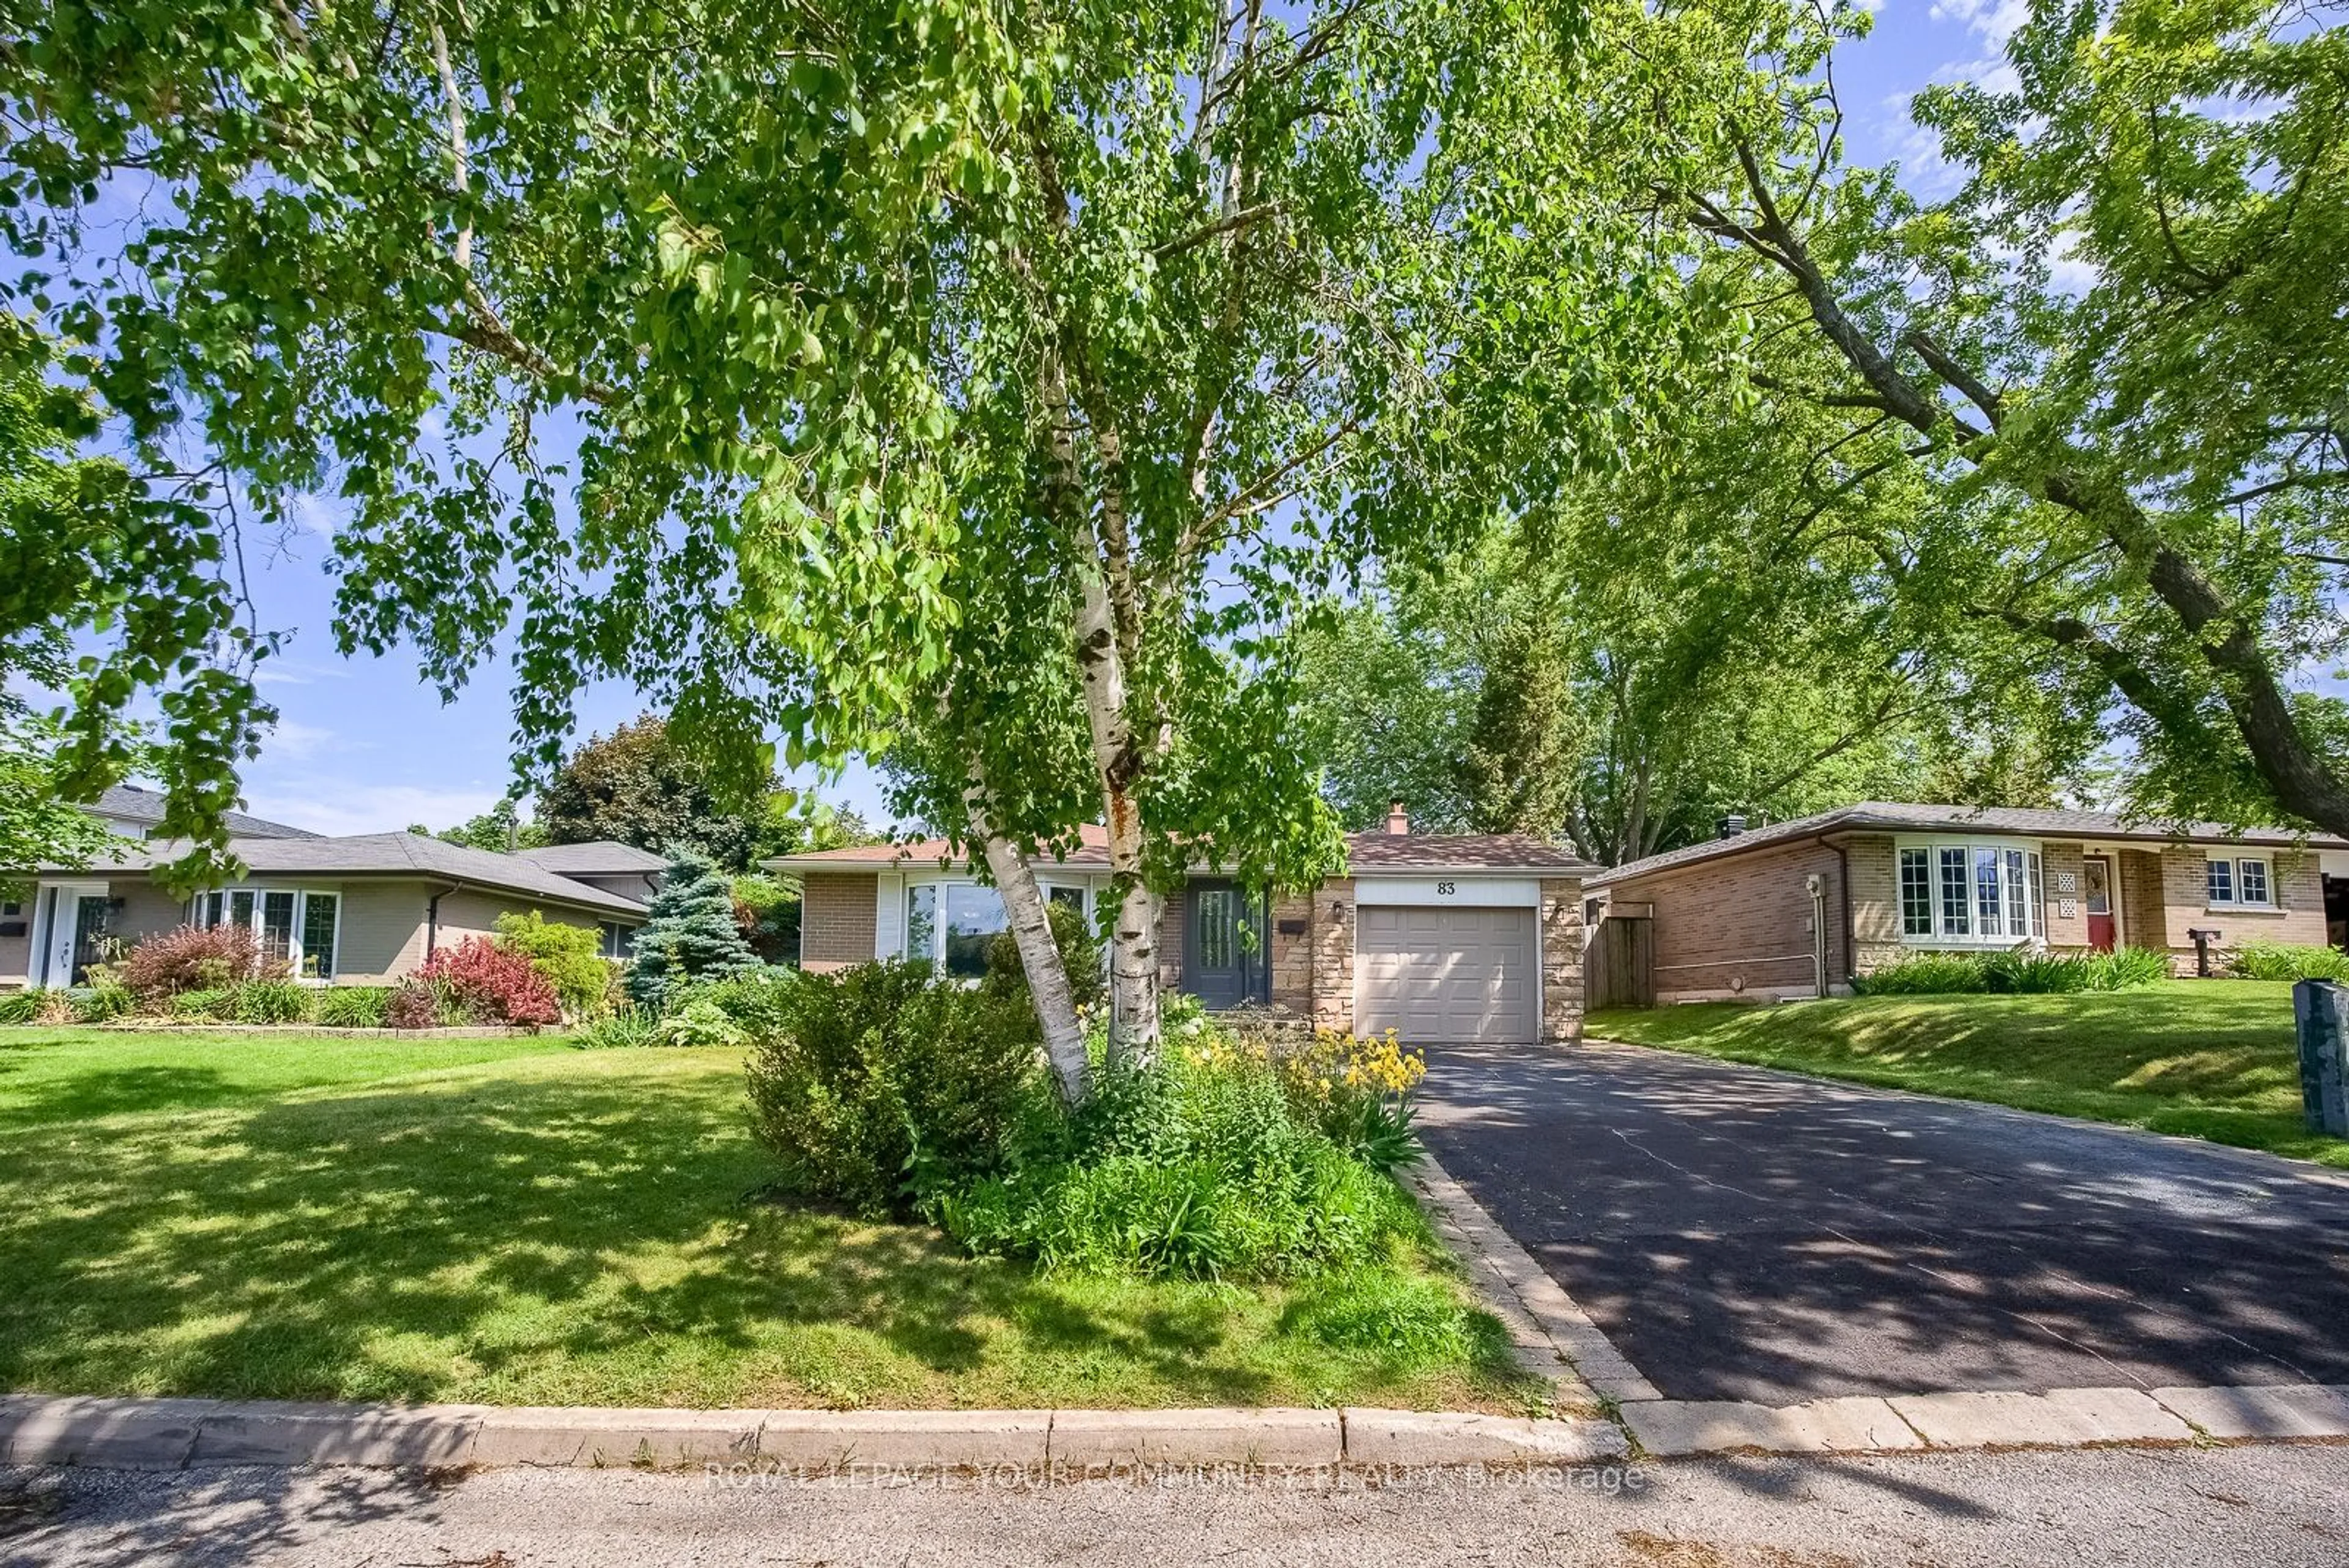 Street view for 83 Harland Cres, Ajax Ontario L1S 1K2